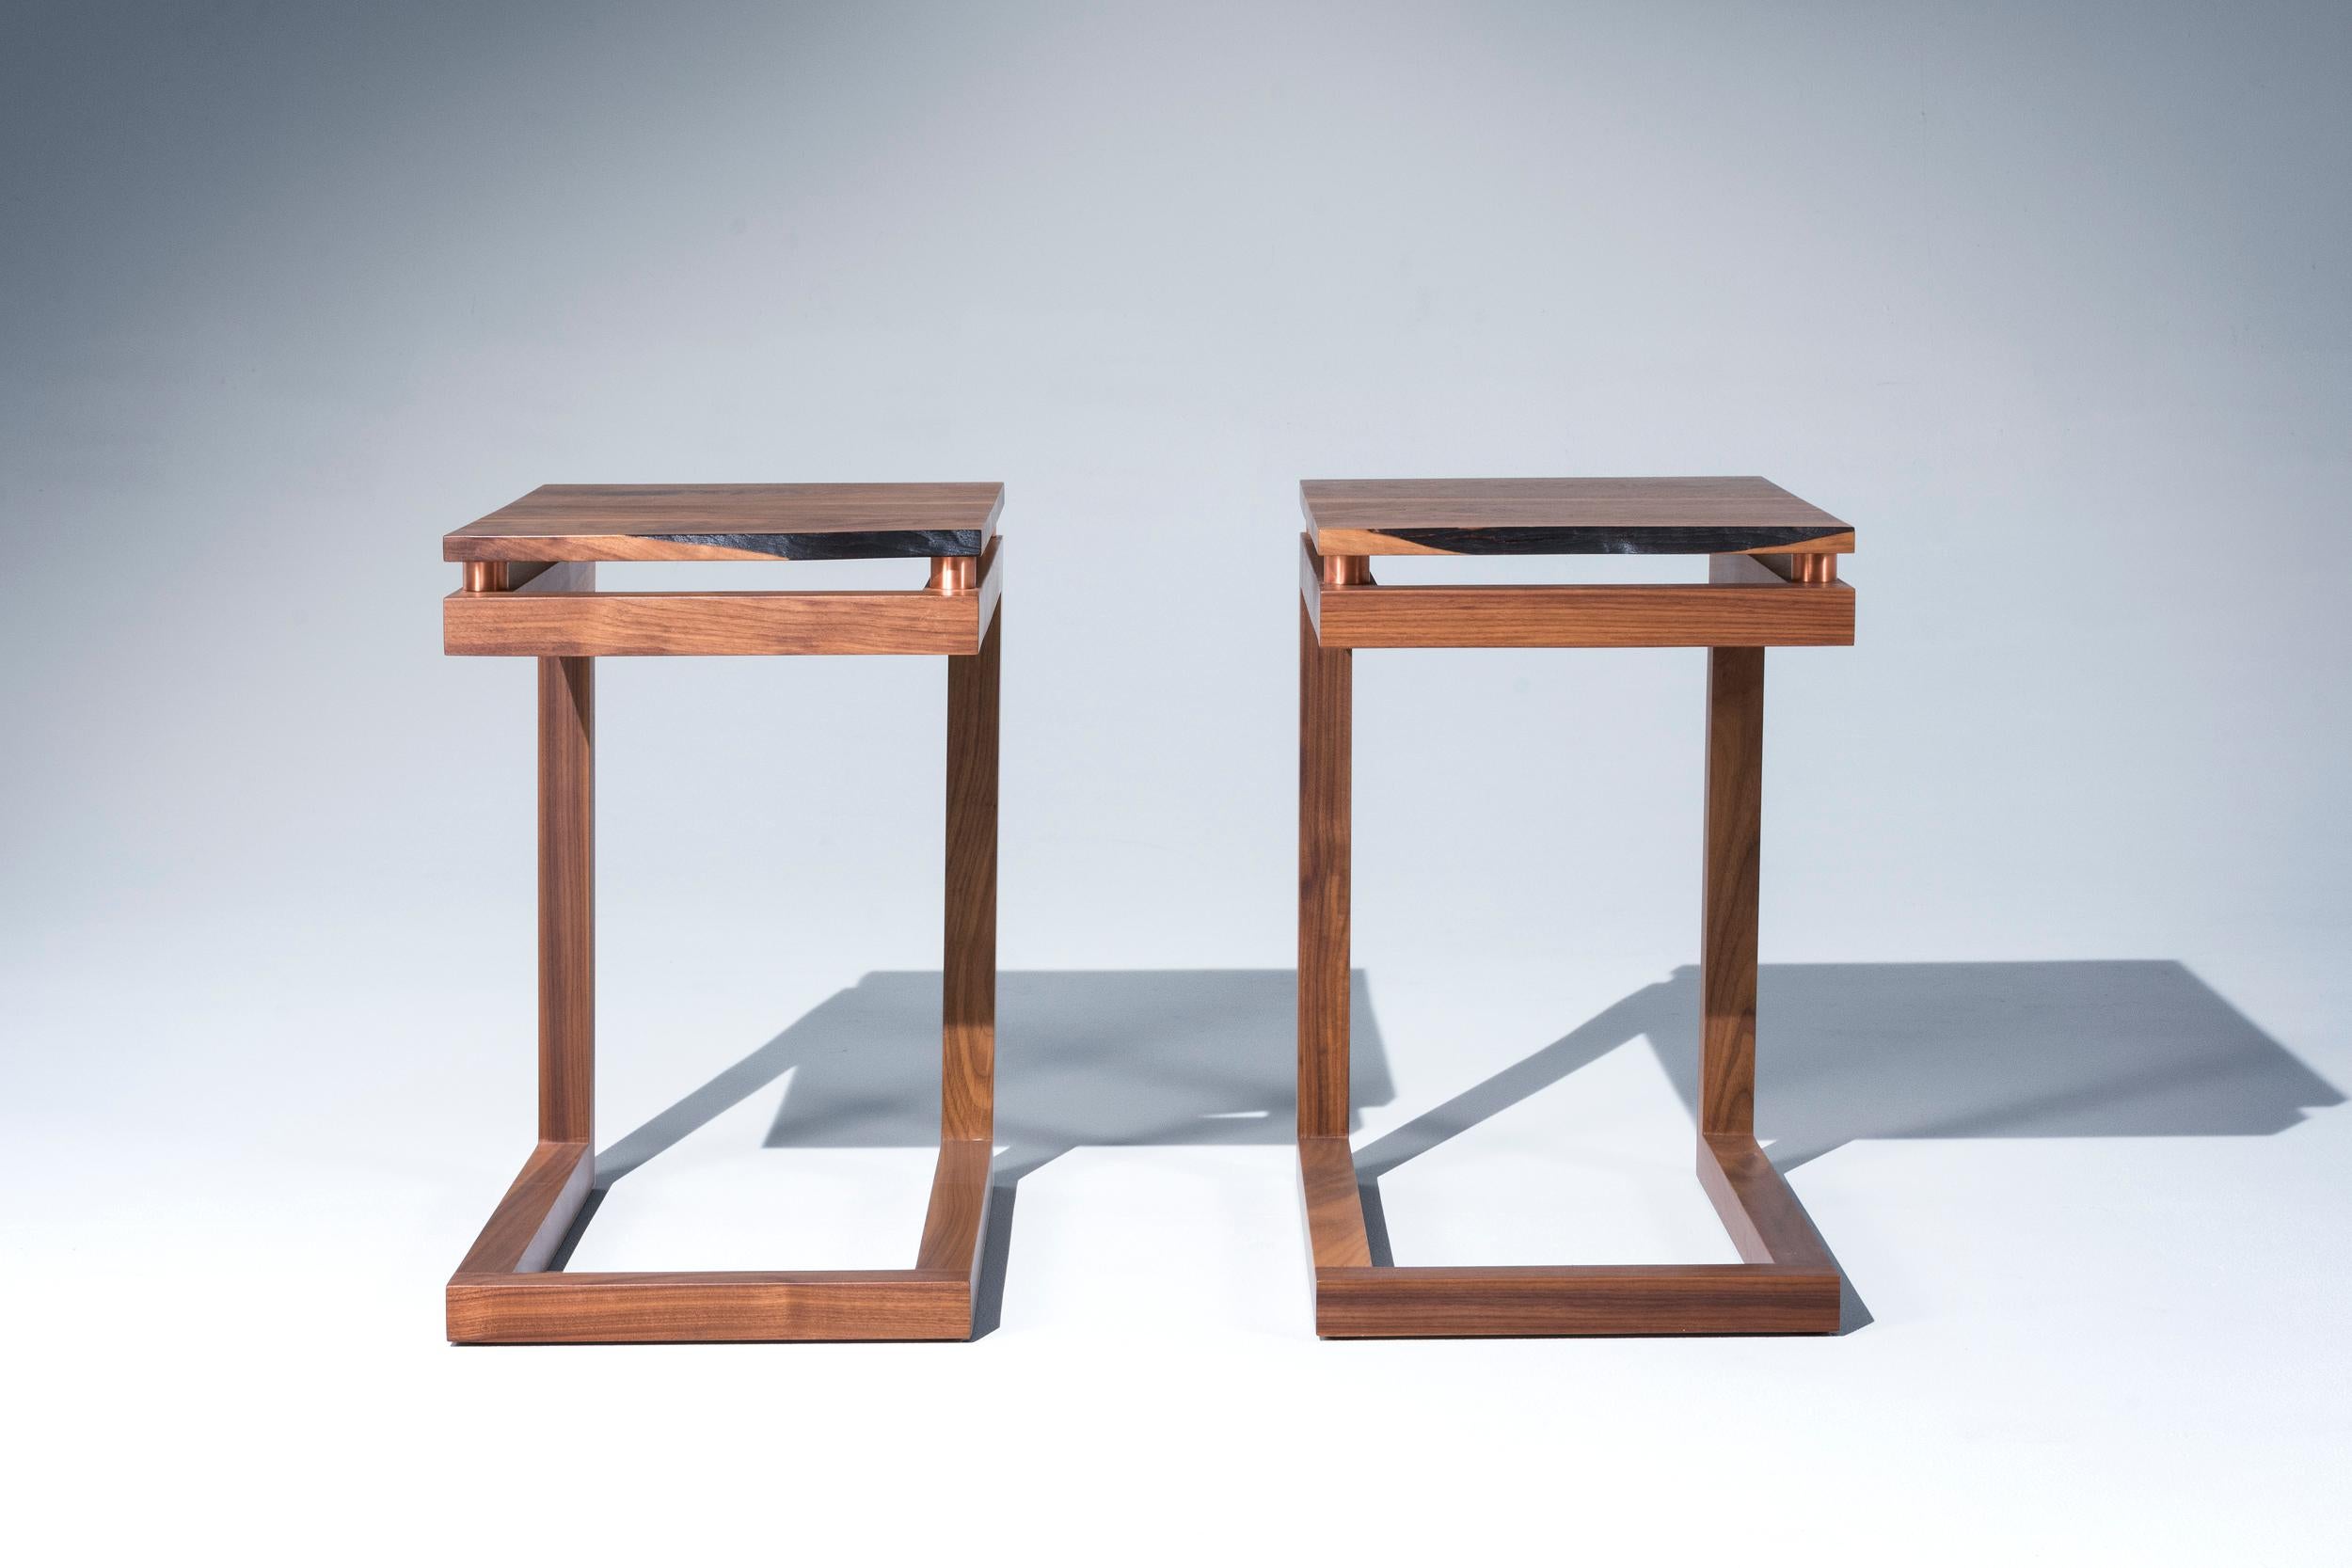 Metalwork Walnut Live Edge with Copper Tubing Side Table 